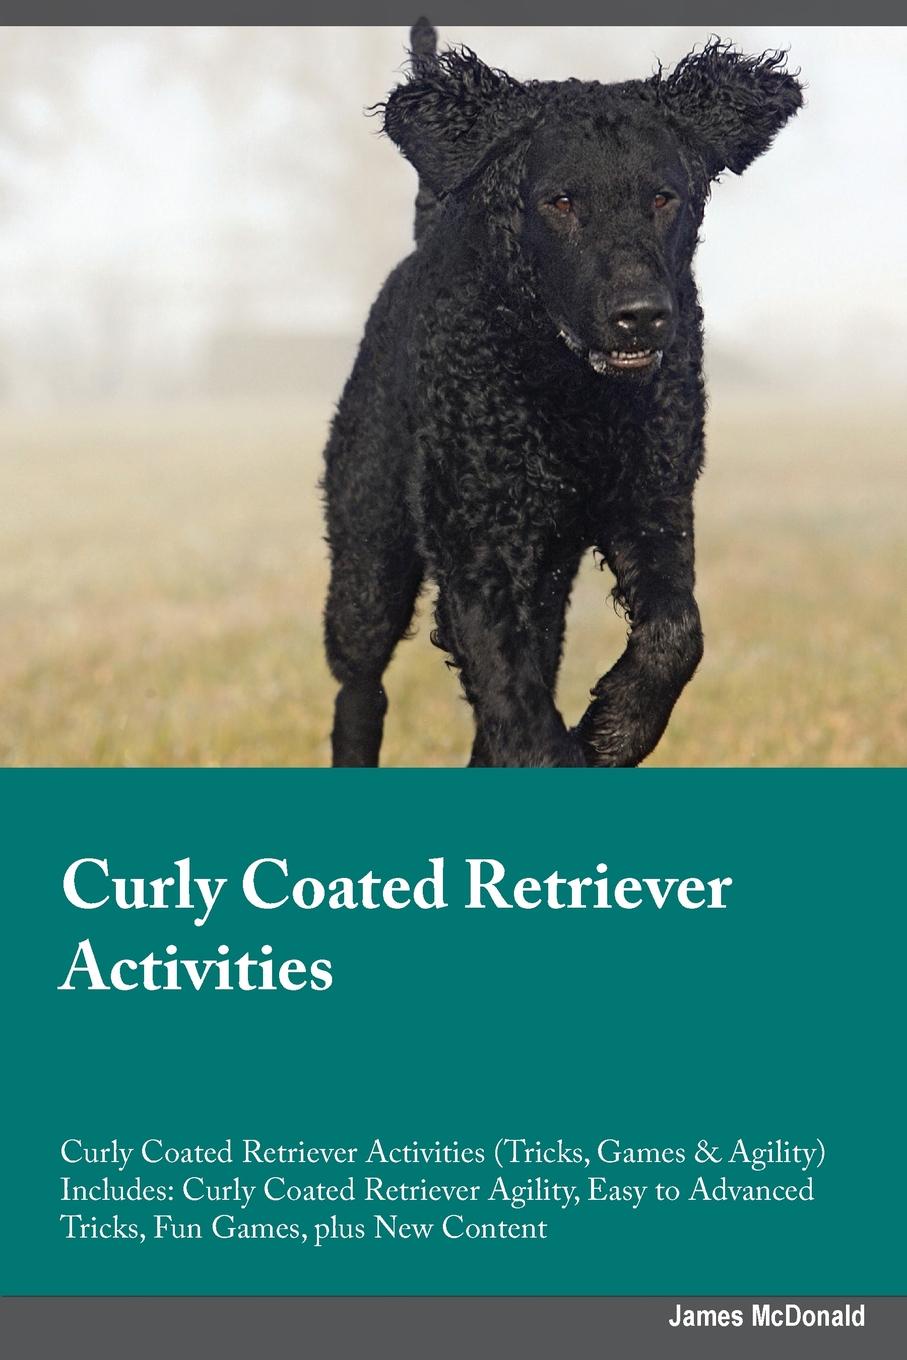 Curly Coated Retriever Activities Curly Coated Retriever Activities (Tricks, Games & Agility) Includes. Curly Coated Retriever Agility, Easy to Advanced Tricks, Fun Games, plus New Content